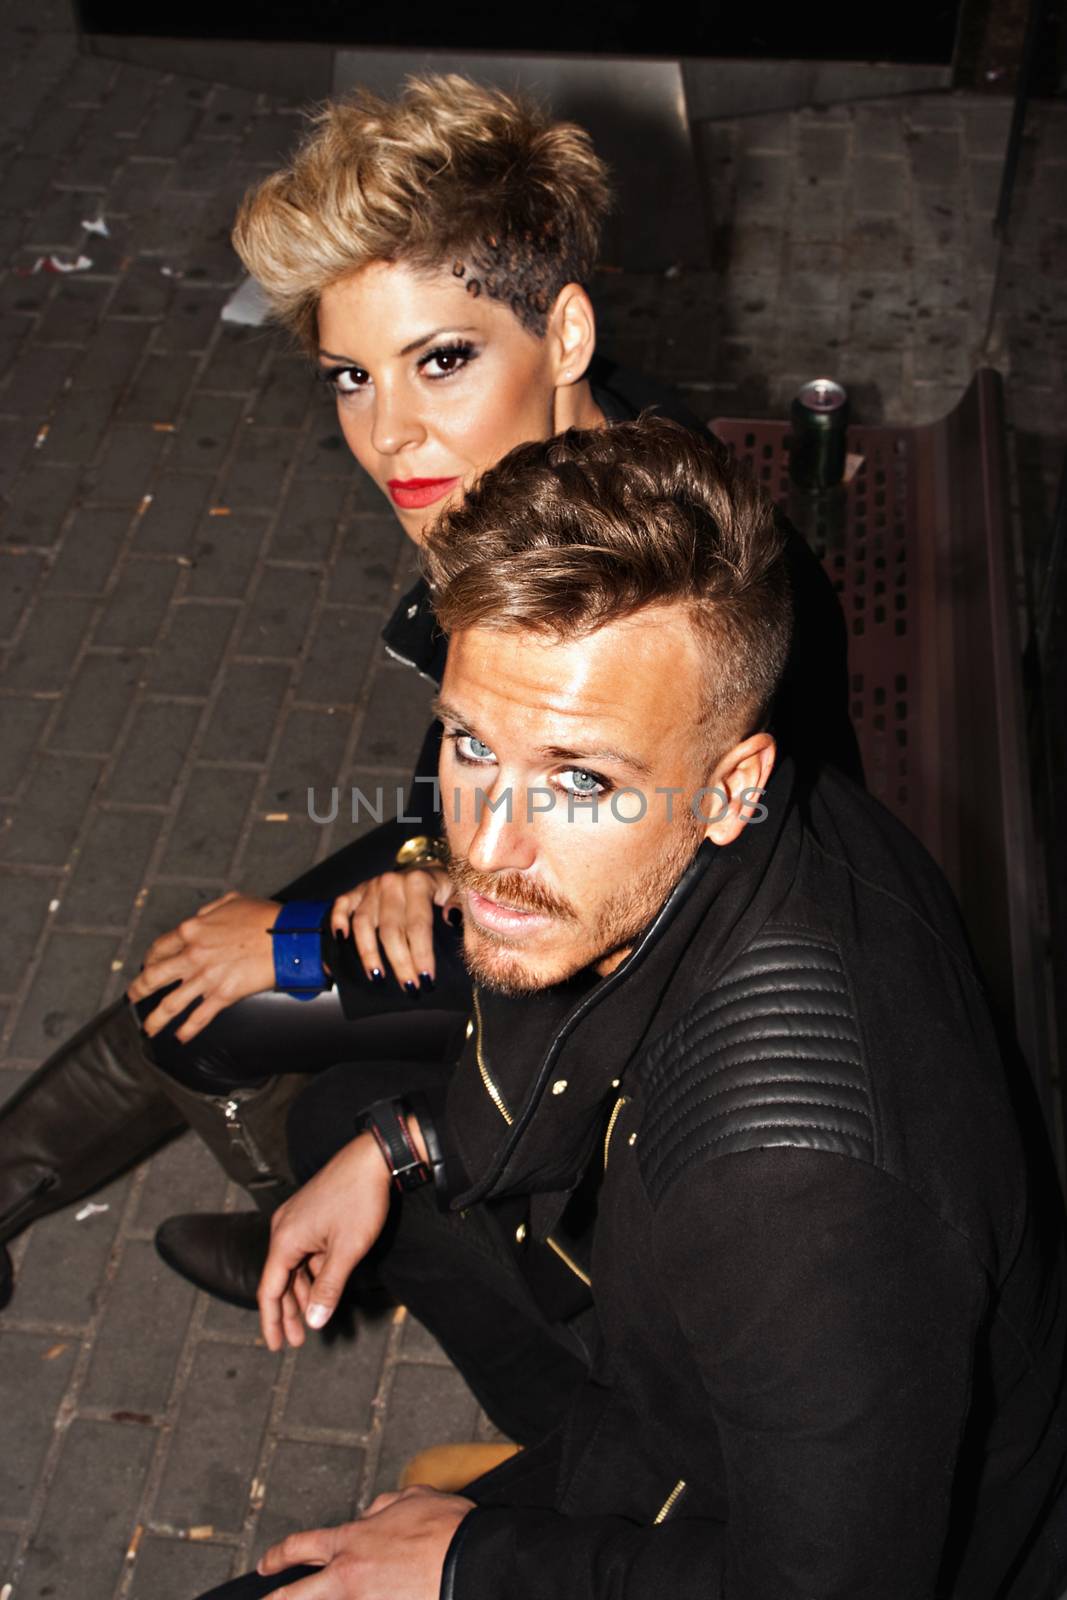 Fashionable young couple sitting at the bus stop with defiant look. Urban fashion photography. Vertical image.